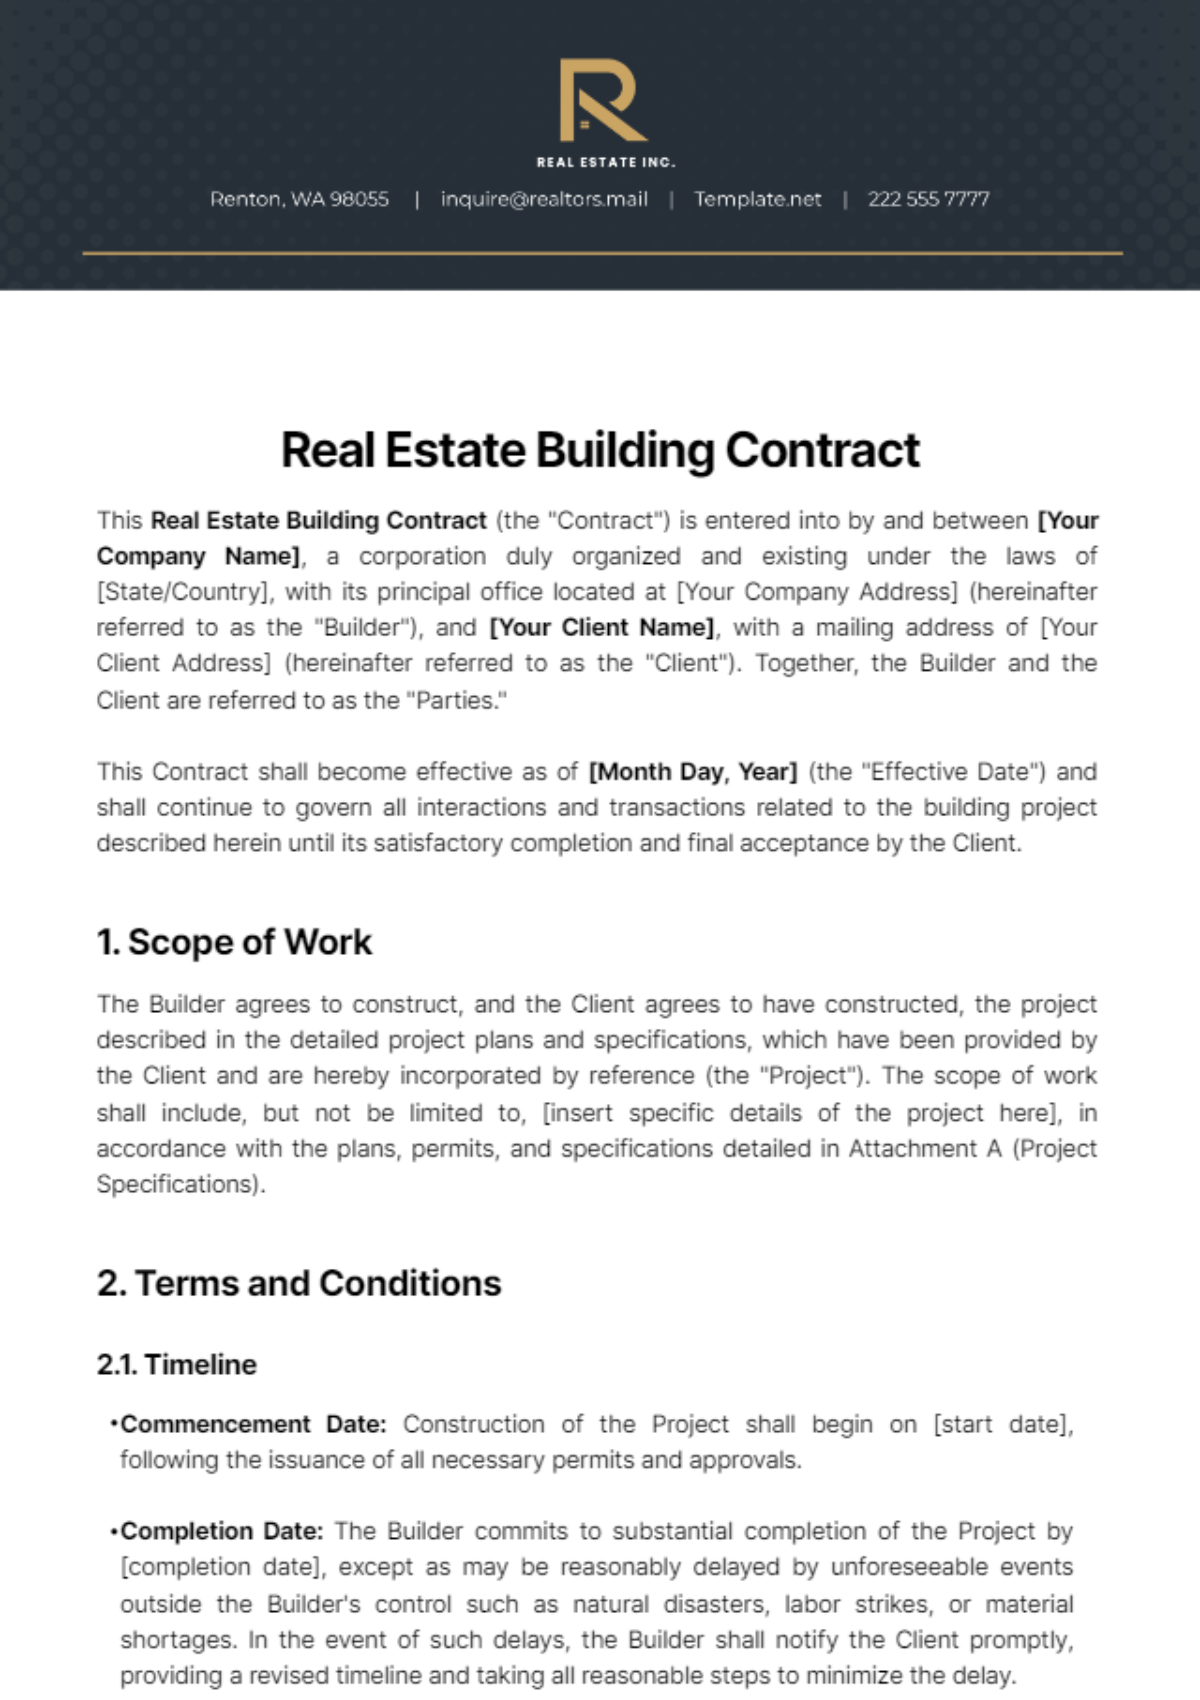 Real Estate Building Contract Template